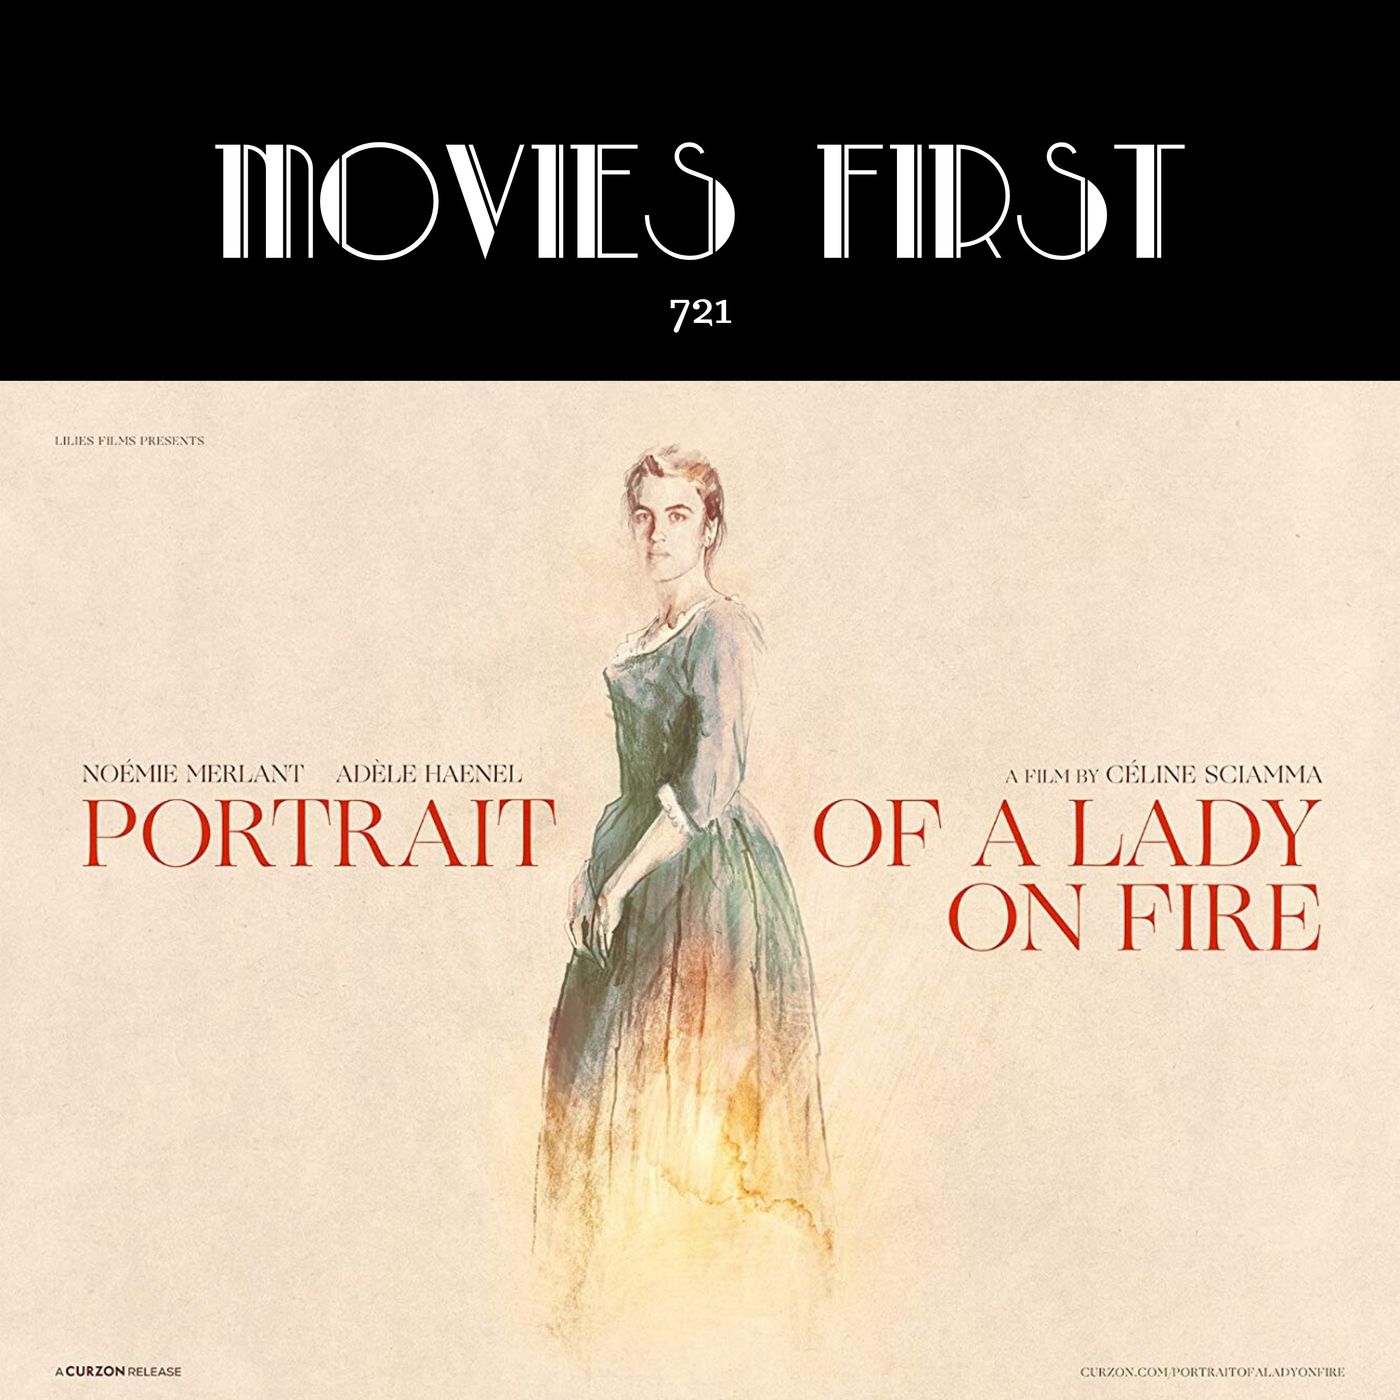 721: Portrait Of A Lady On Fire (Drama, Romance) (the @MoviesFirst review)